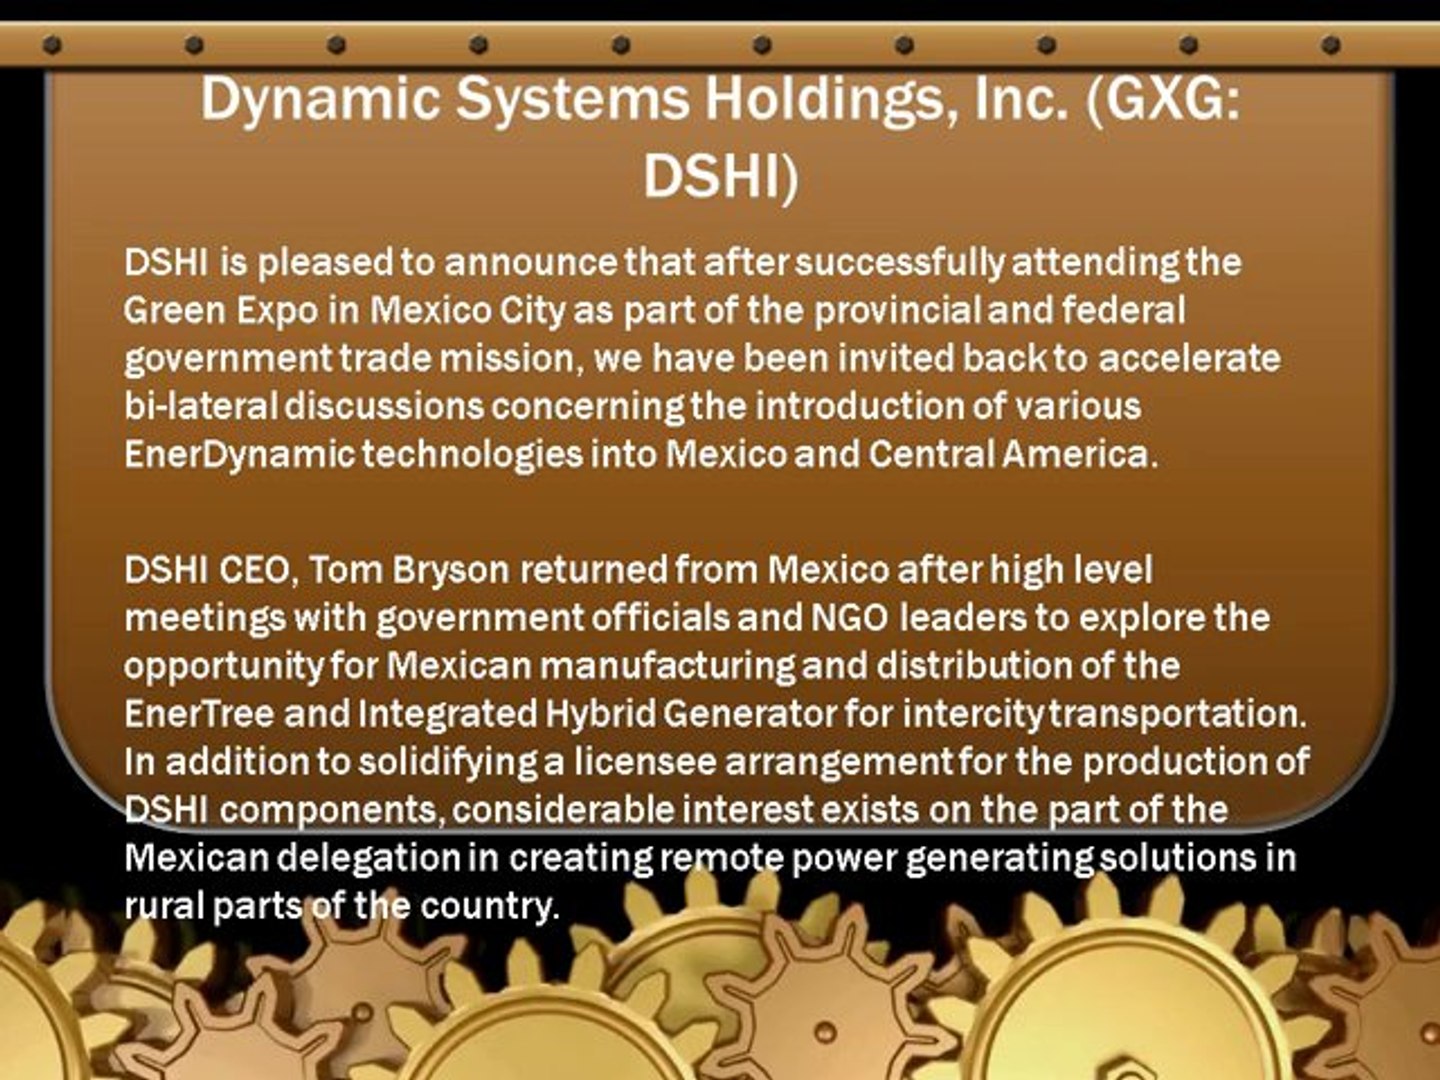 dynamic systems holdings - DSHI announces return visit to Mexico